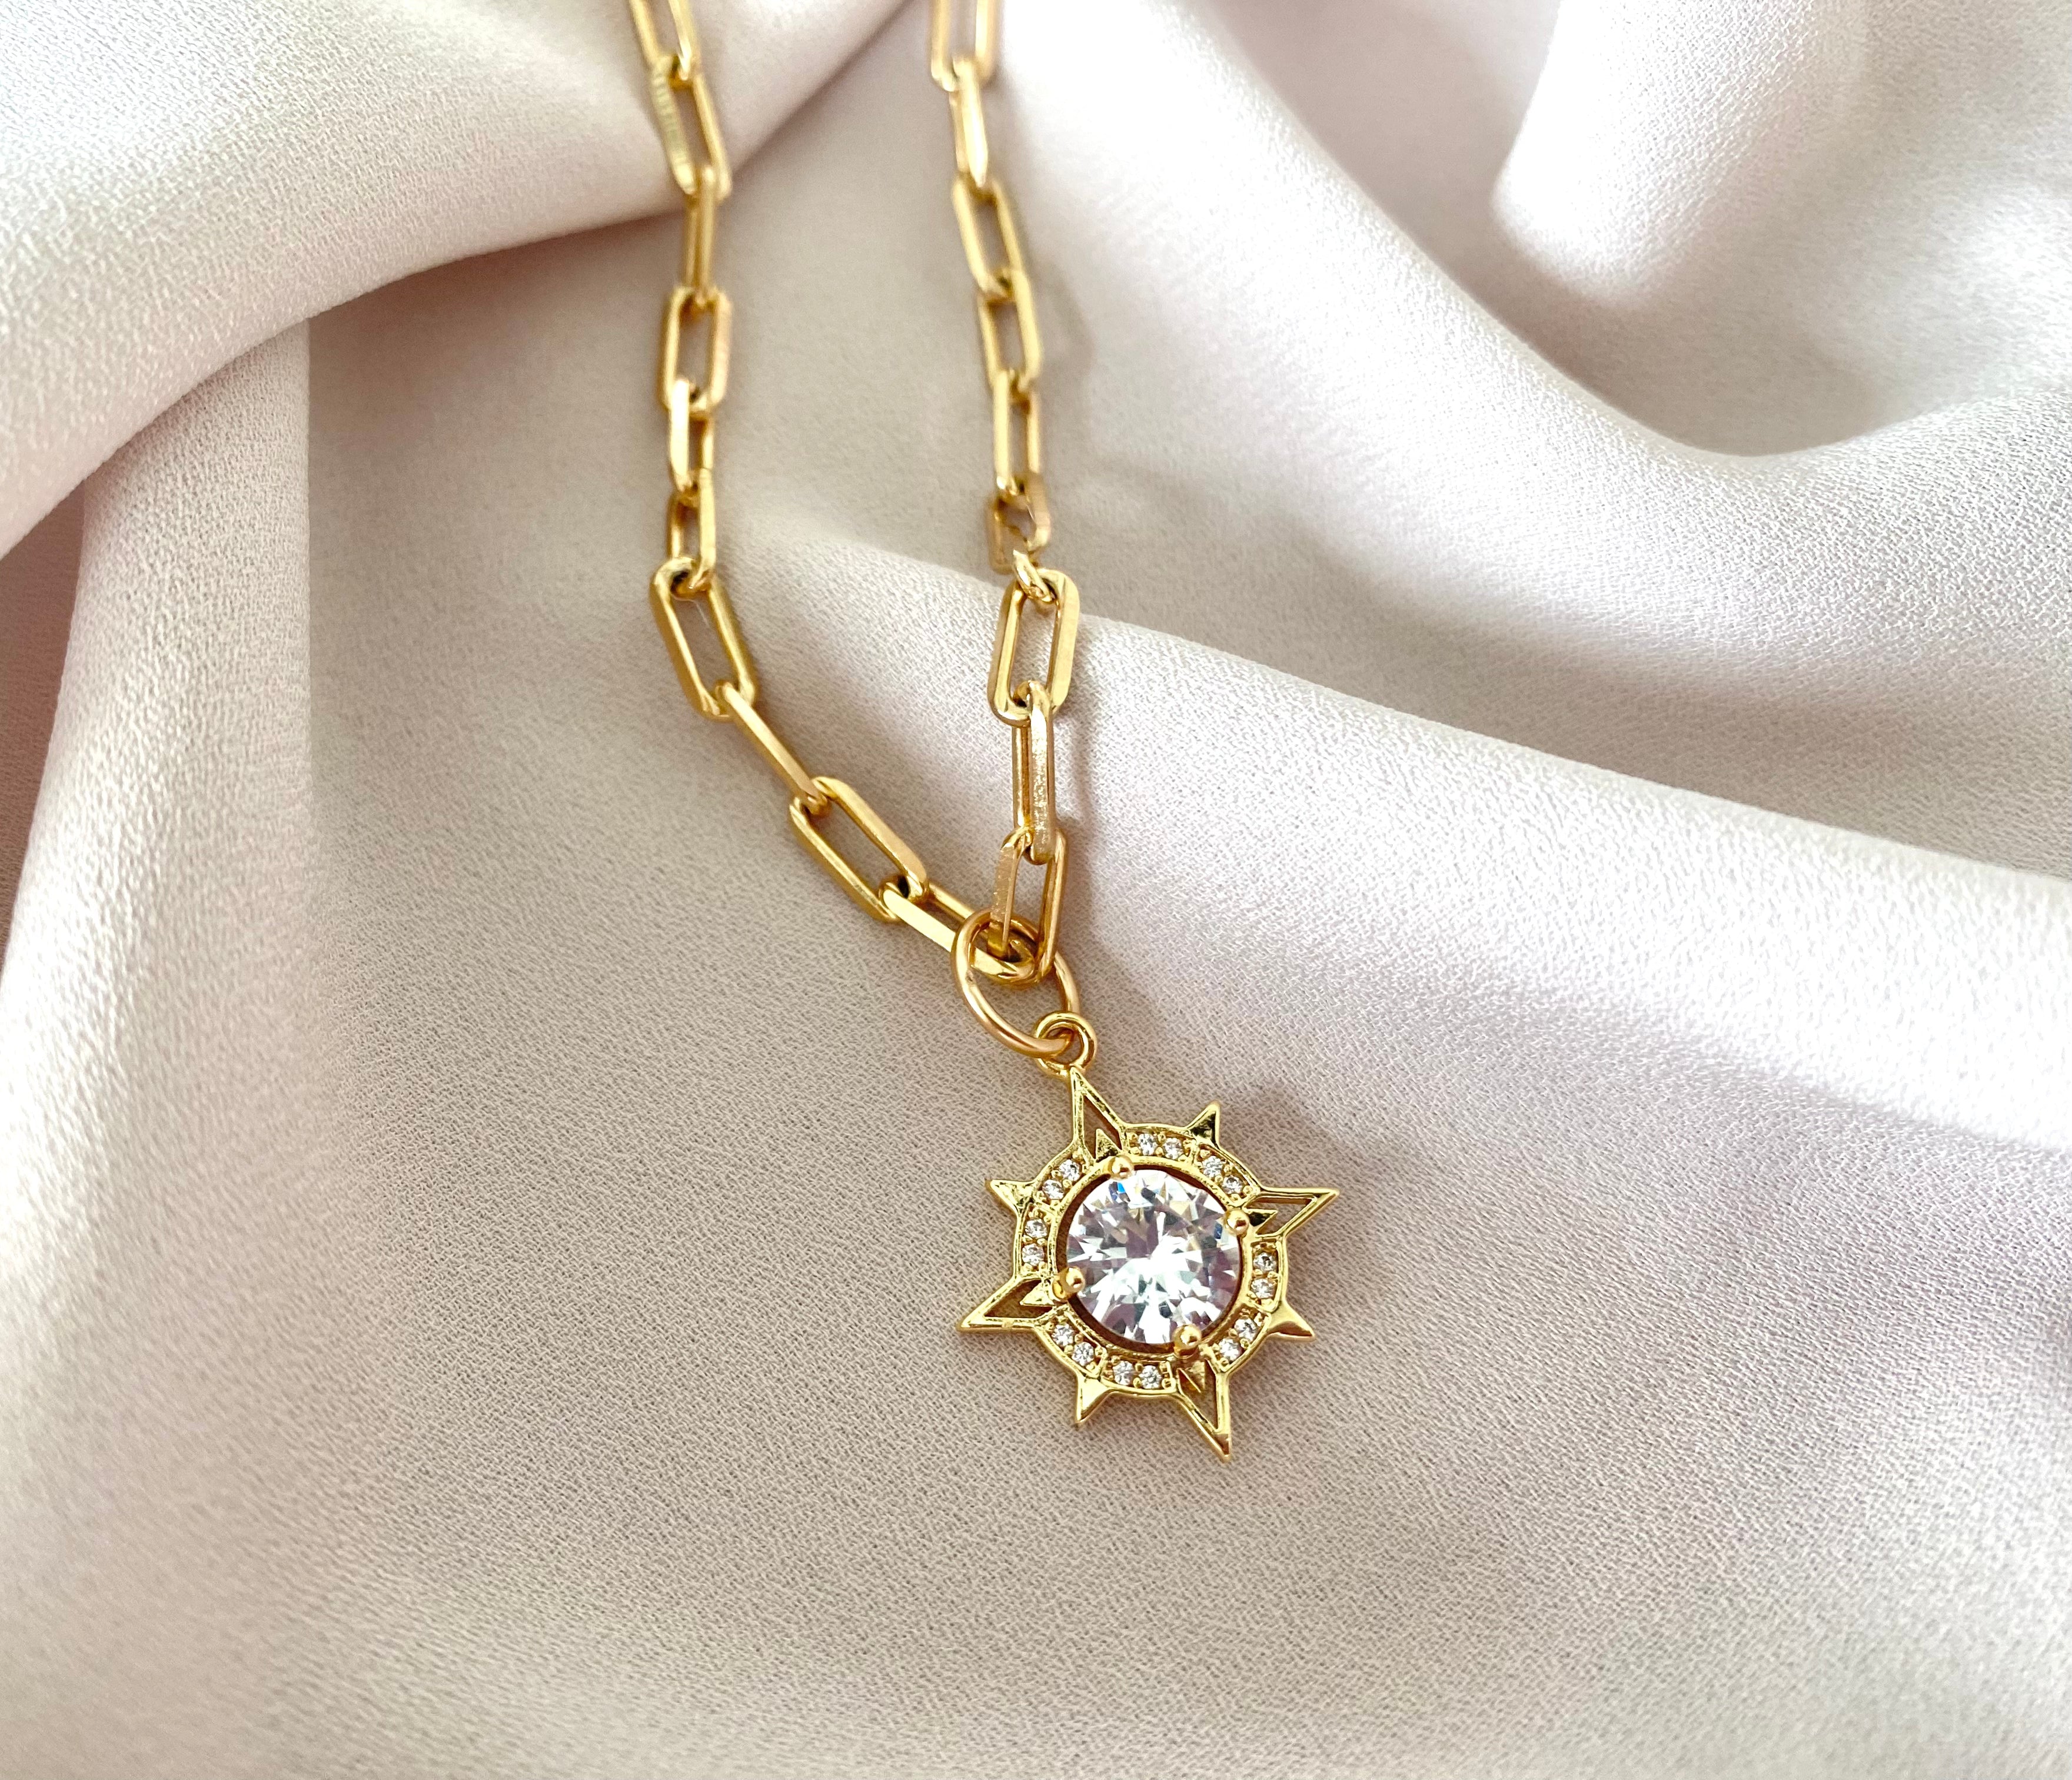 Gold Star Pendant Necklace Gold Filled Paperclip Chain Shiny CZ Micro Pave Necklace Celestial Jewelry Christmas Gift Minimalist Necklaces